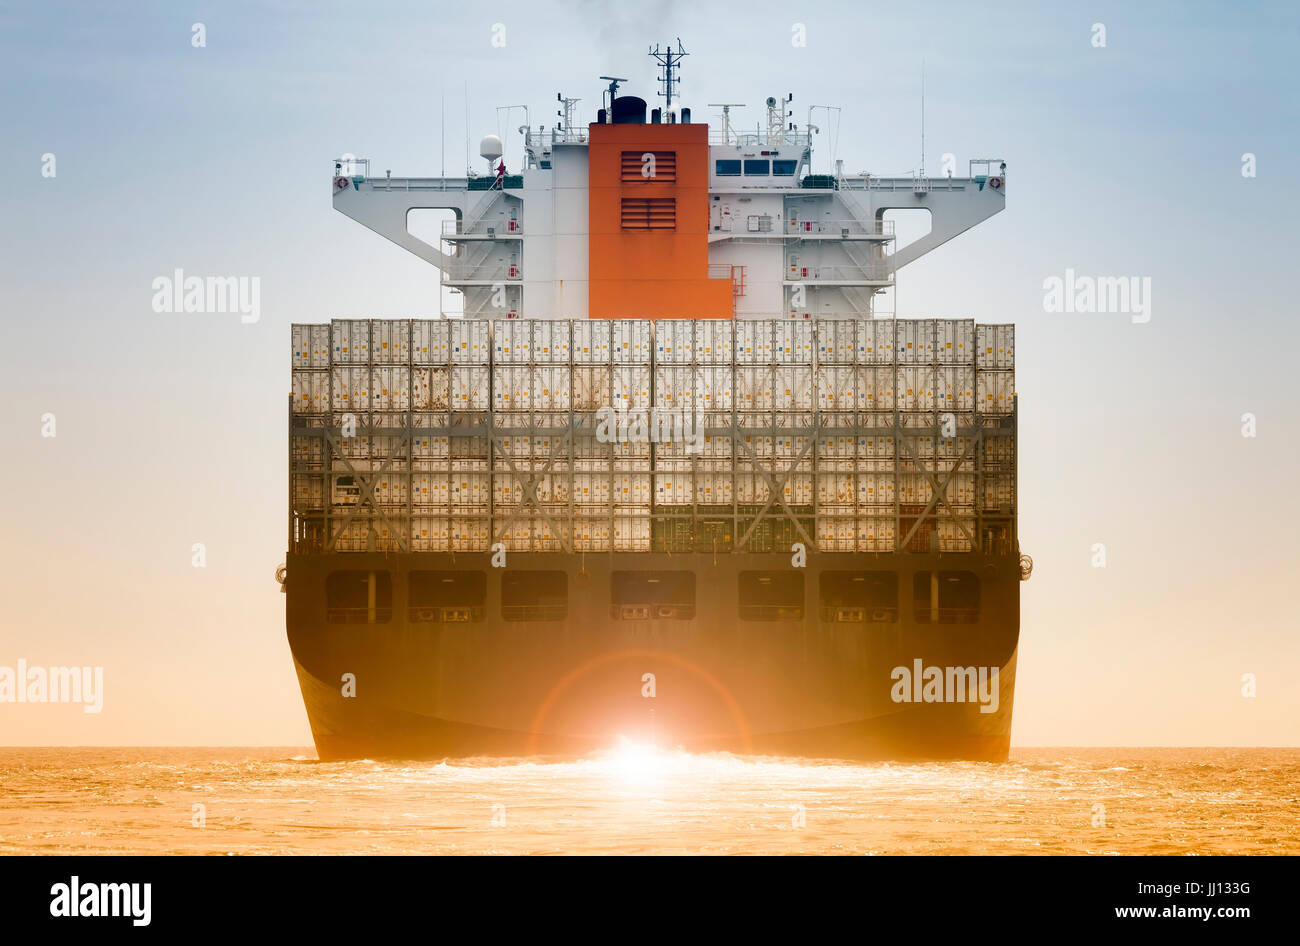 International Container Cargo ship for logistic import export concept of transport industry Stock Photo